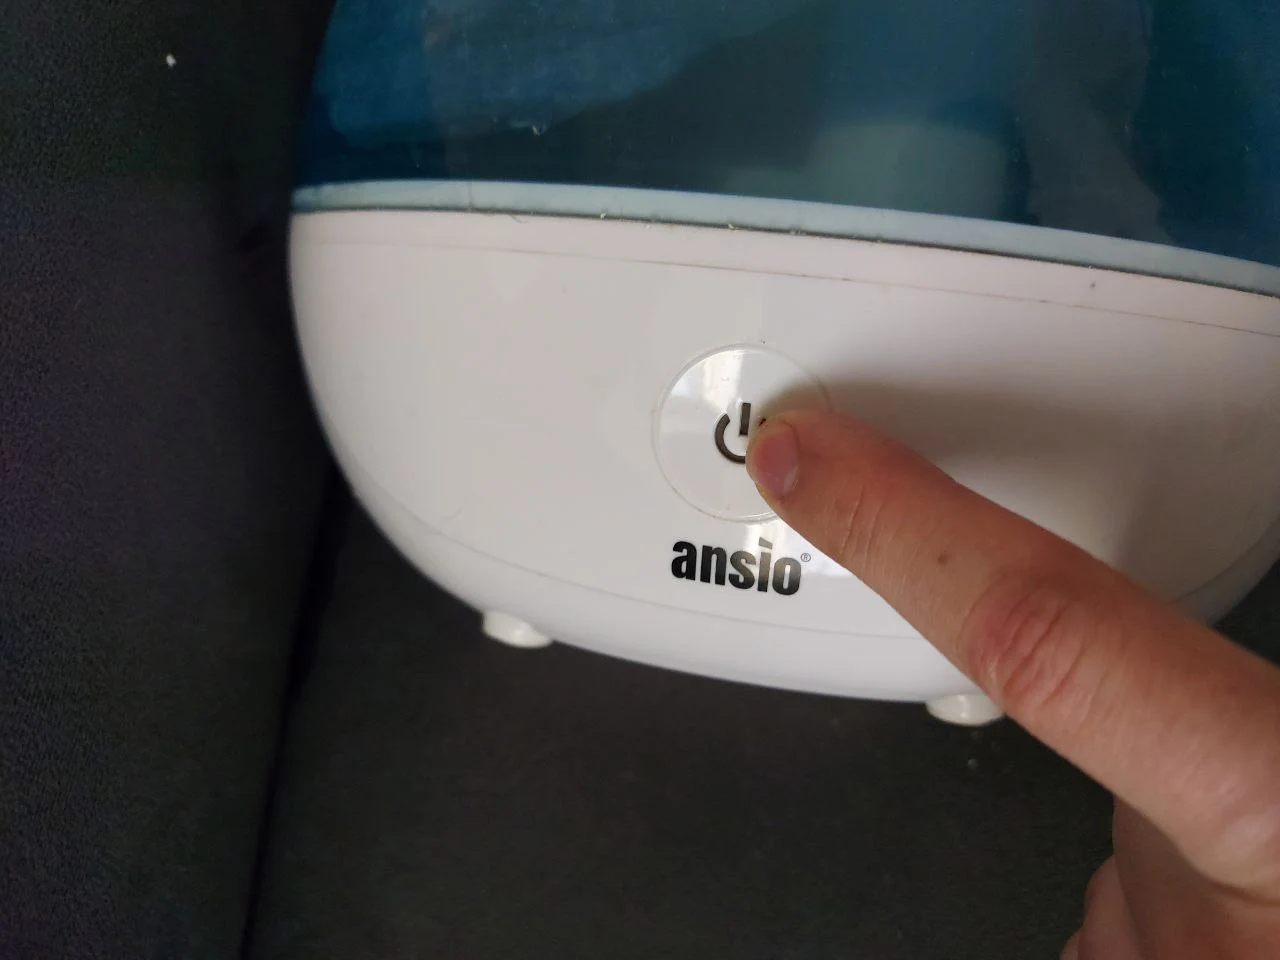 Finger pointing to button on humidifier